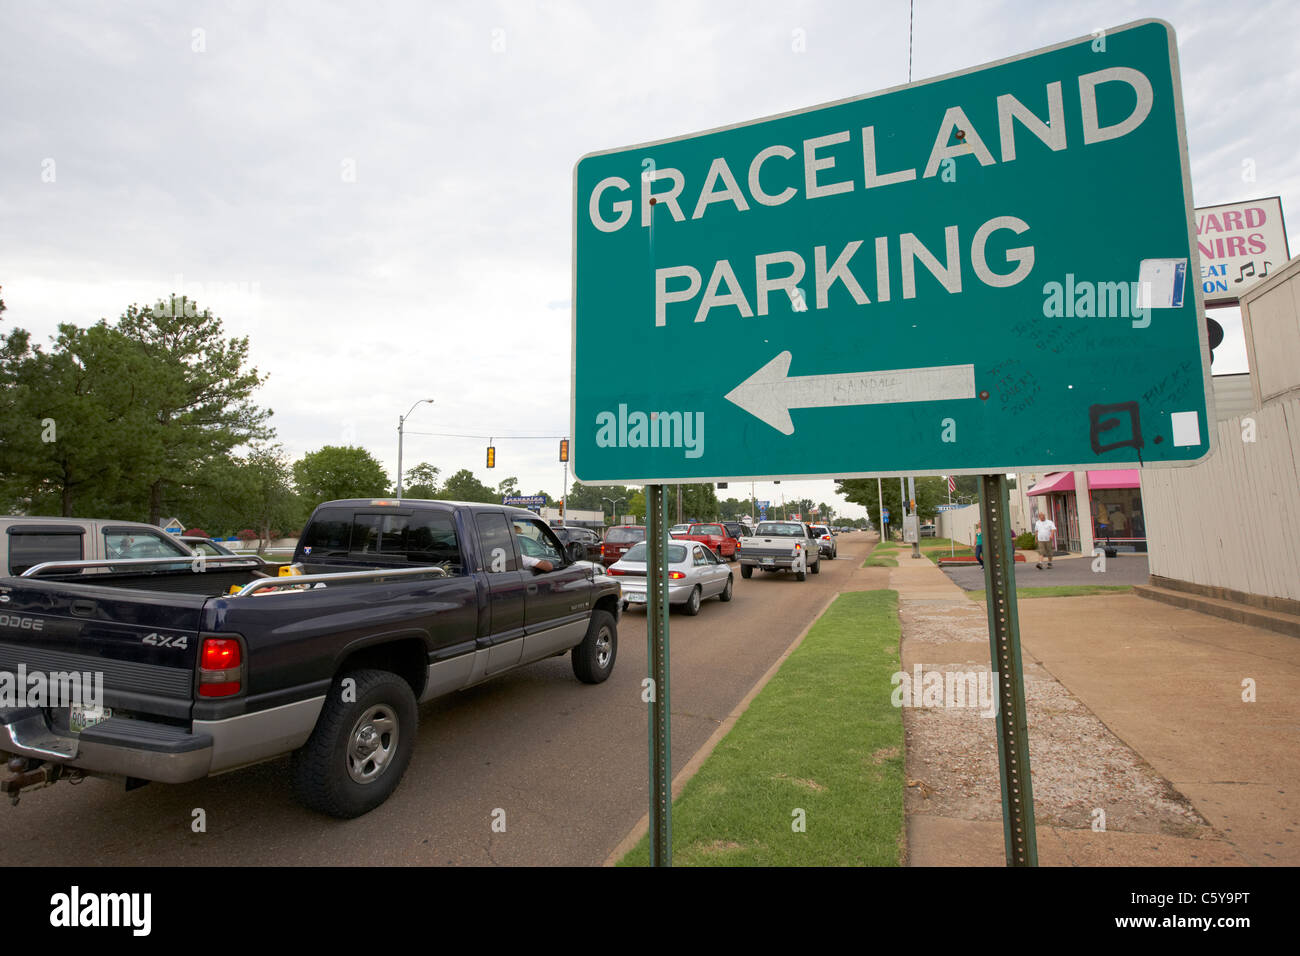 sign for graceland parking on elvis presley boulevard memphis tennessee usa Stock Photo